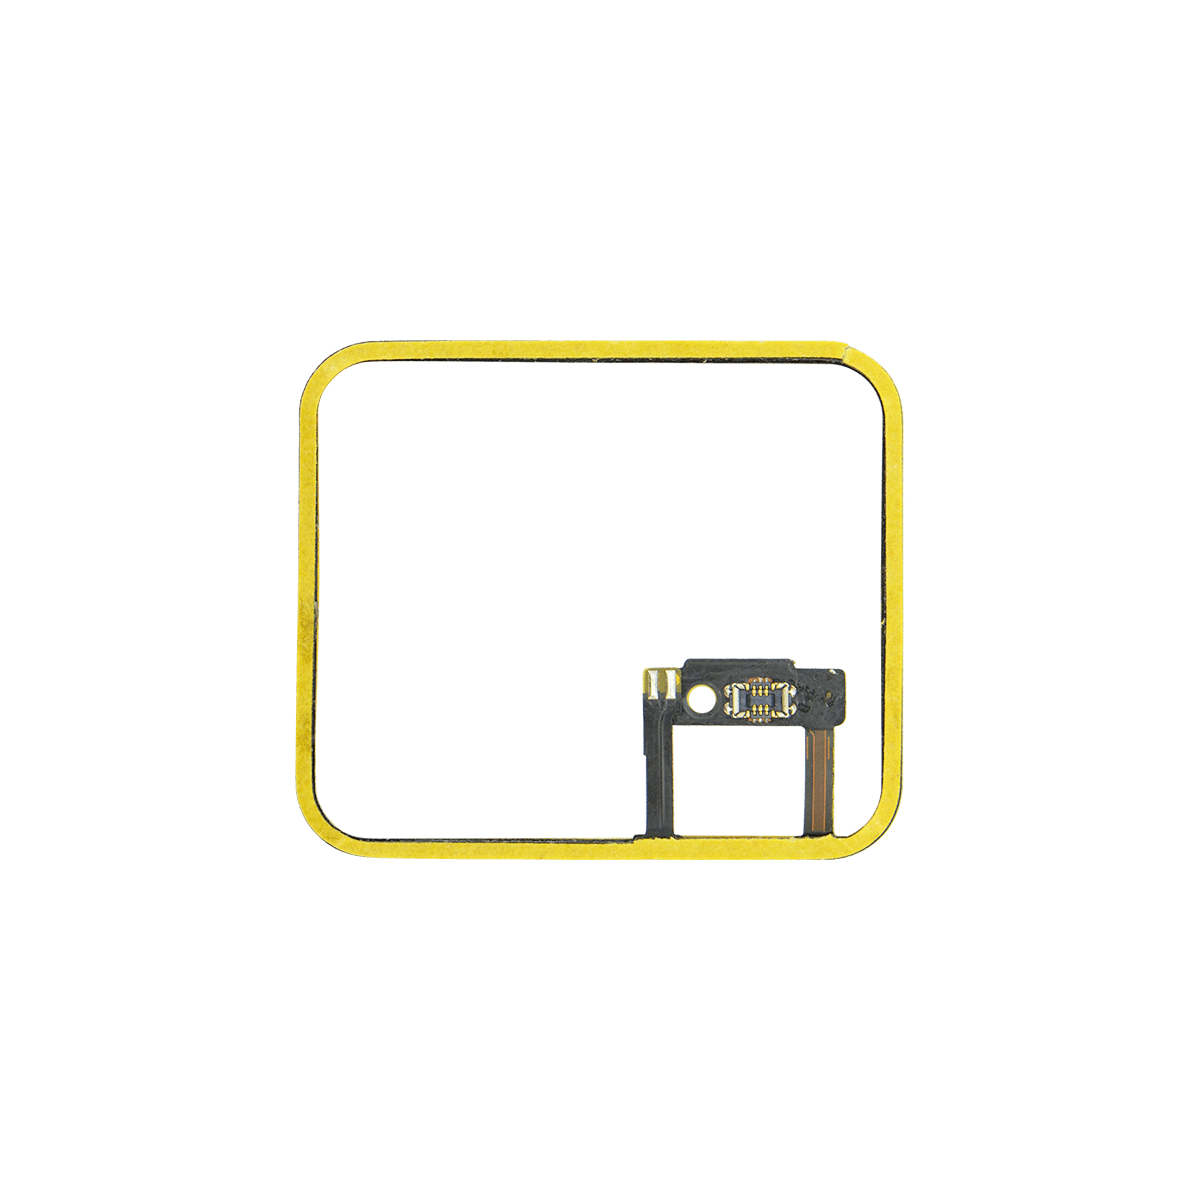 Apple Watch (Series 1) Gasket for the Force Touch Sensor